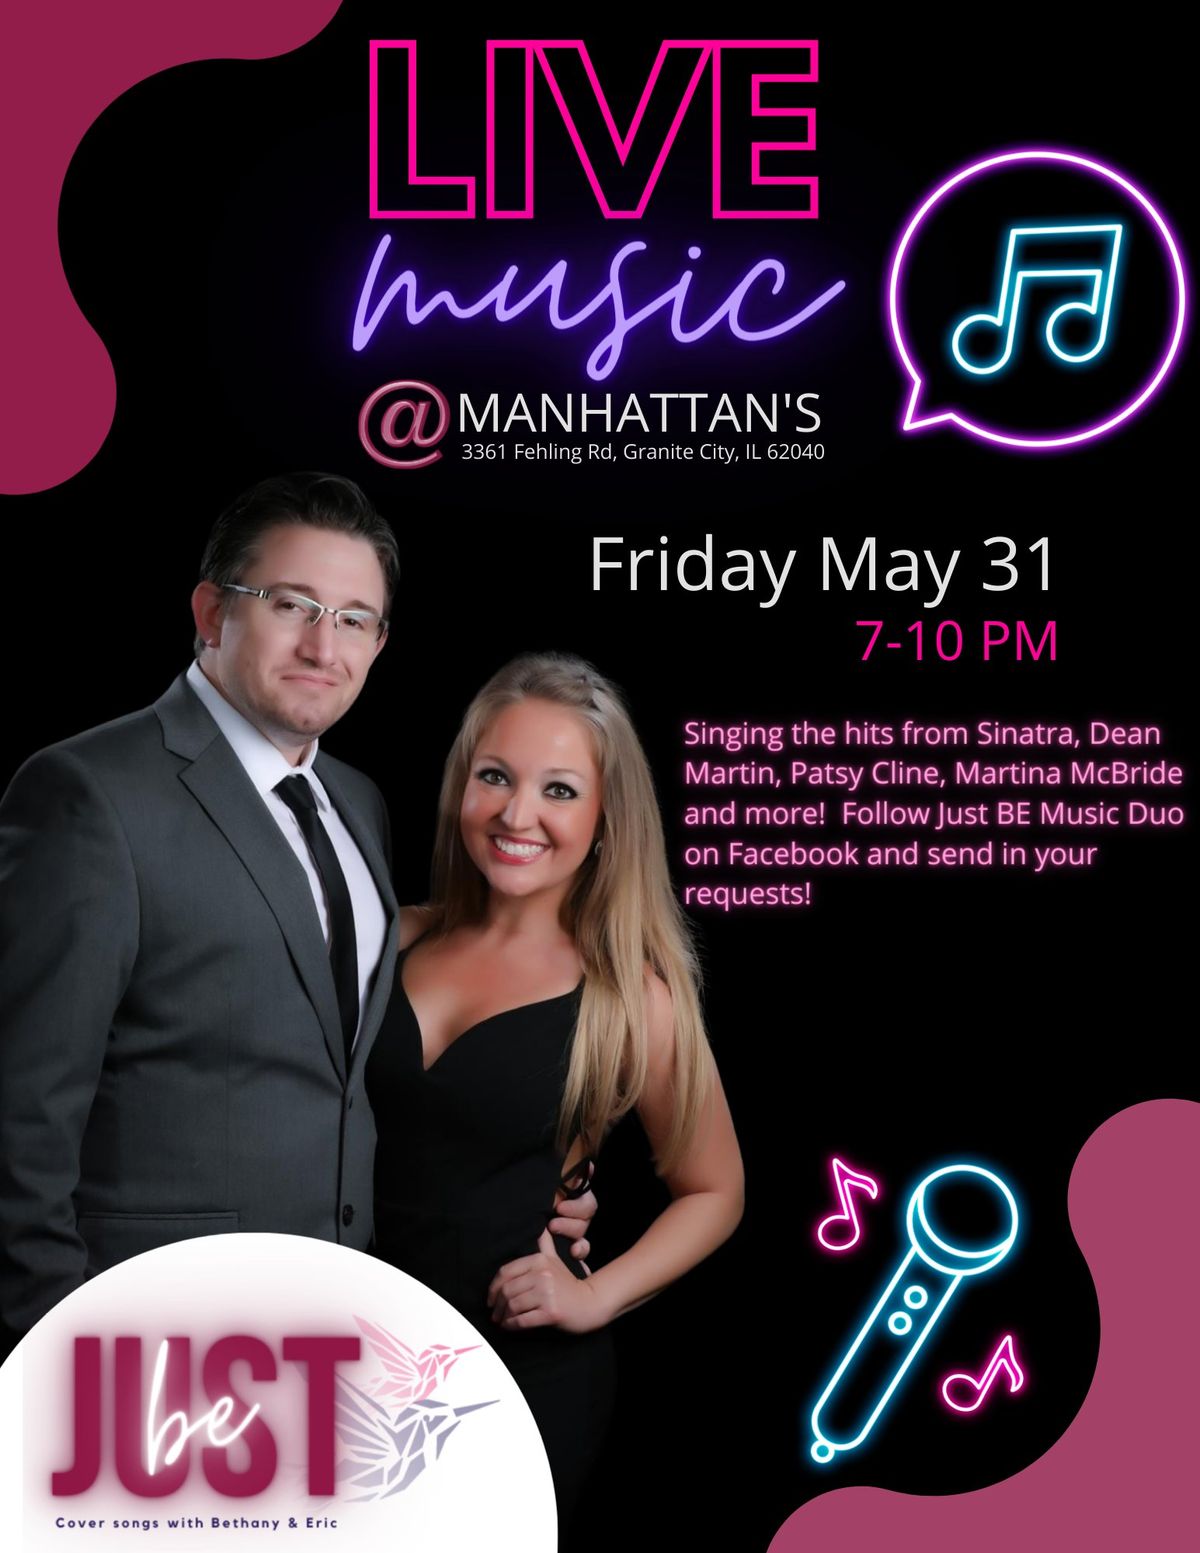 Live Music with 'Just BE' at Manhattan's